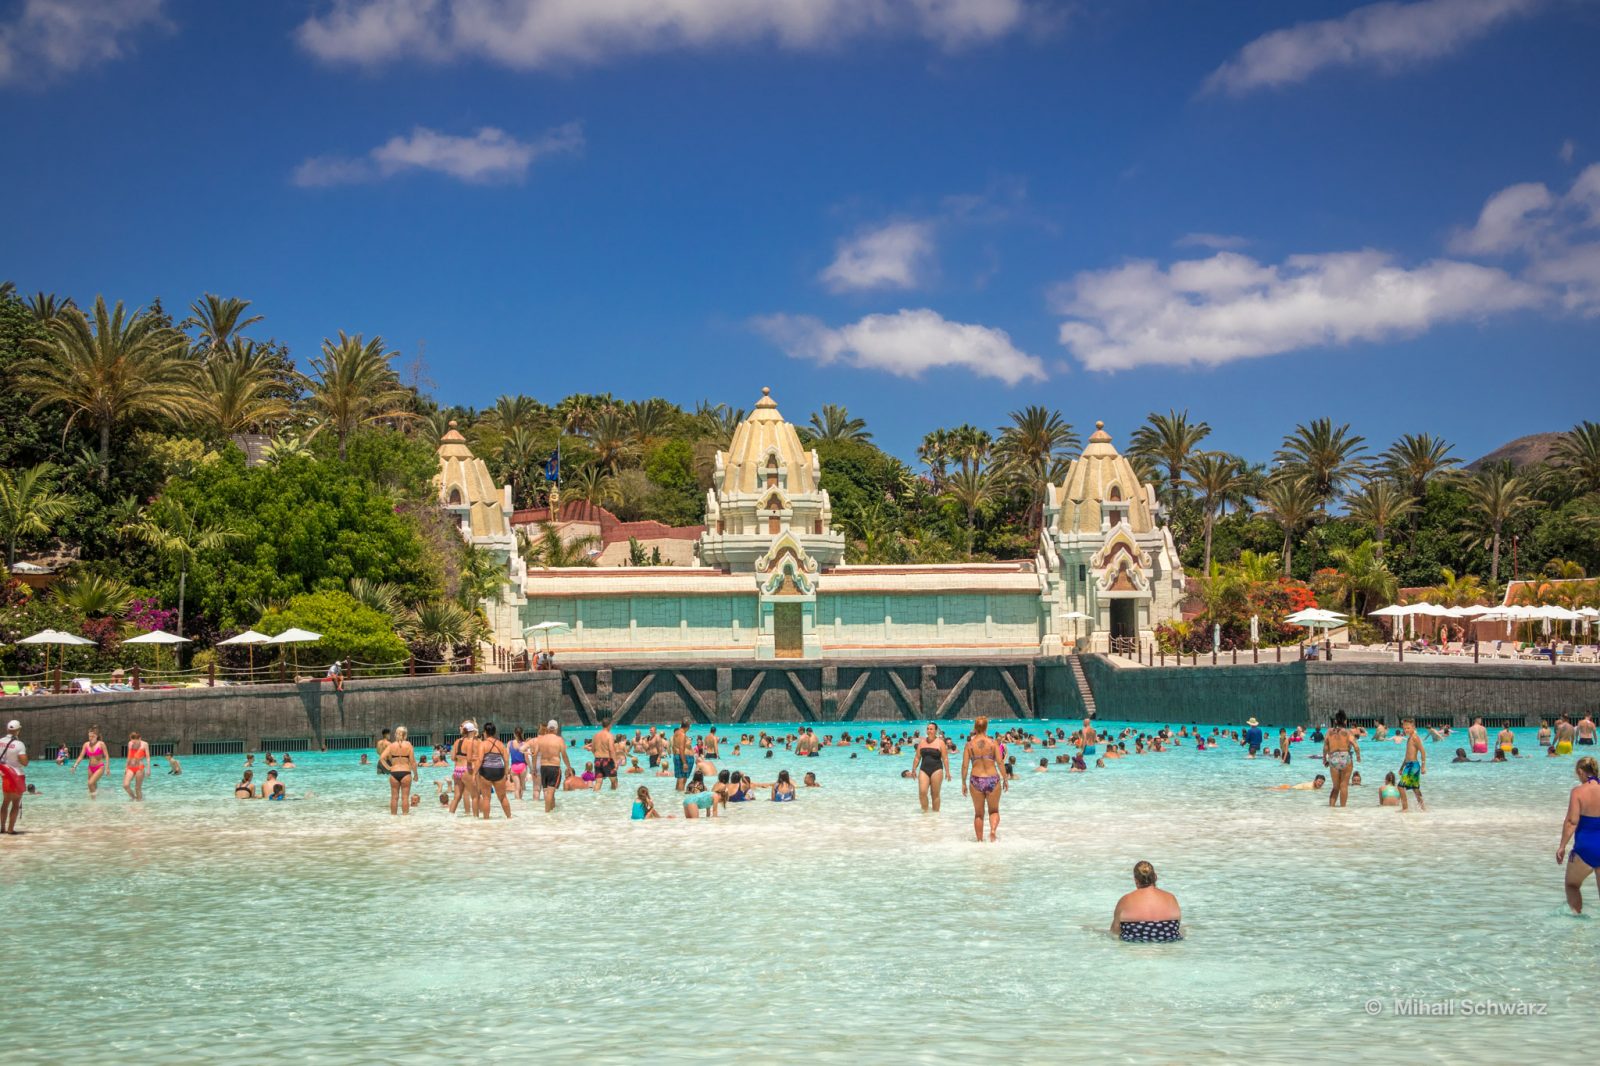 The Wave Palace in Siam Park